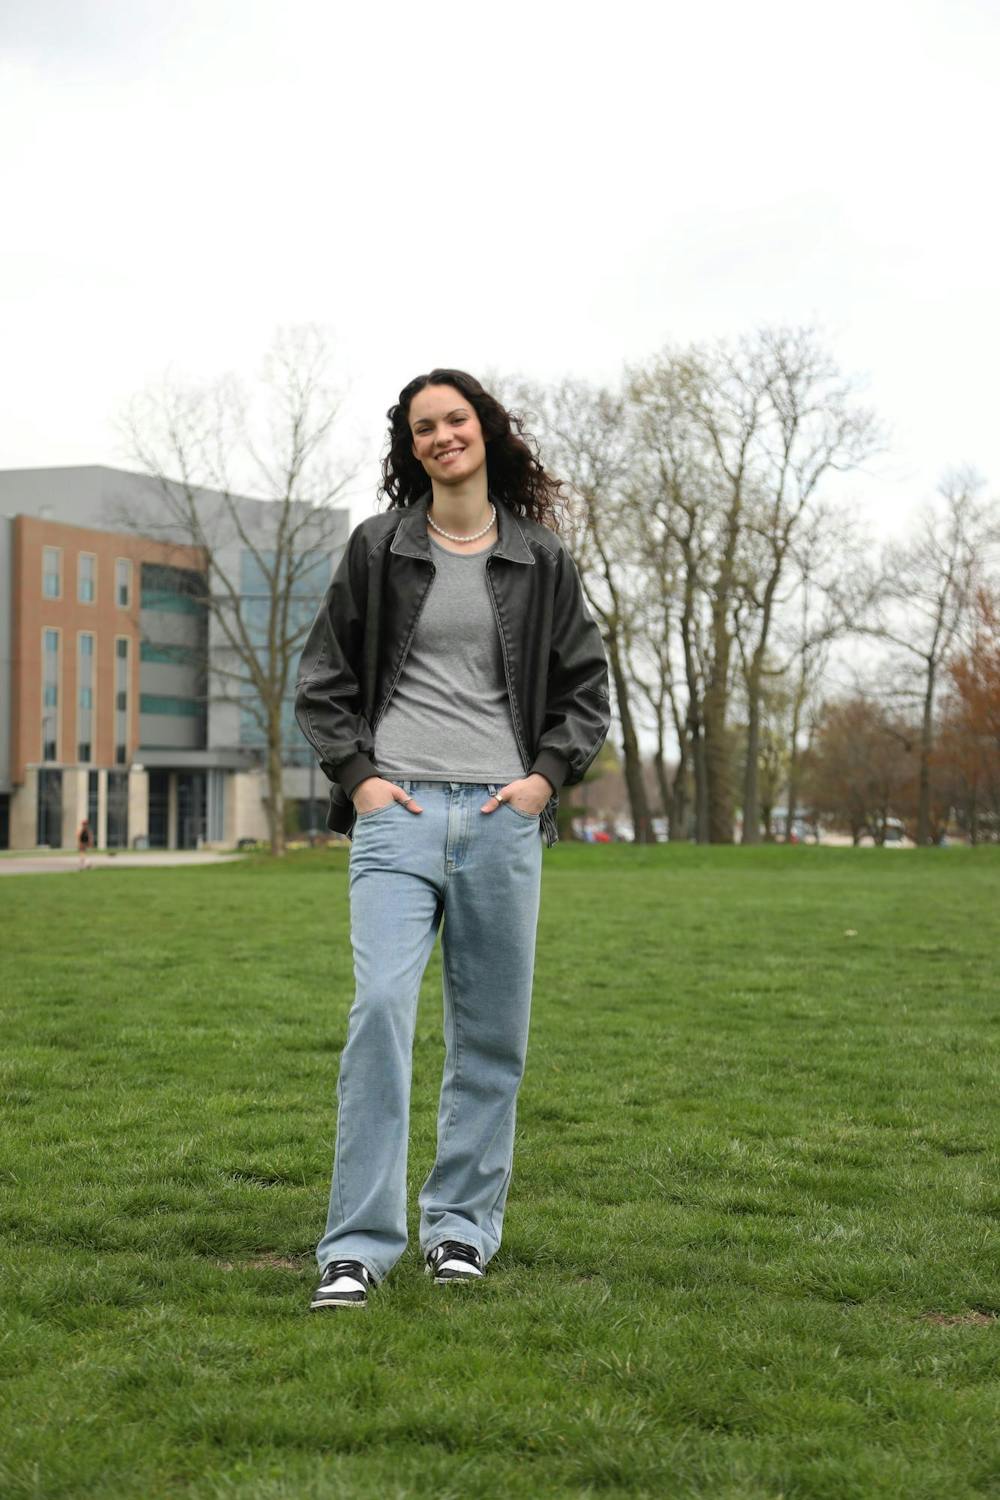 <p>Senior Estel Puiggros poses for a photo April 9 outside Worthen Arena. Puiggros said there isn’t a difference between being a gay athlete and a straight athlete. Mya Cataline, DN</p>